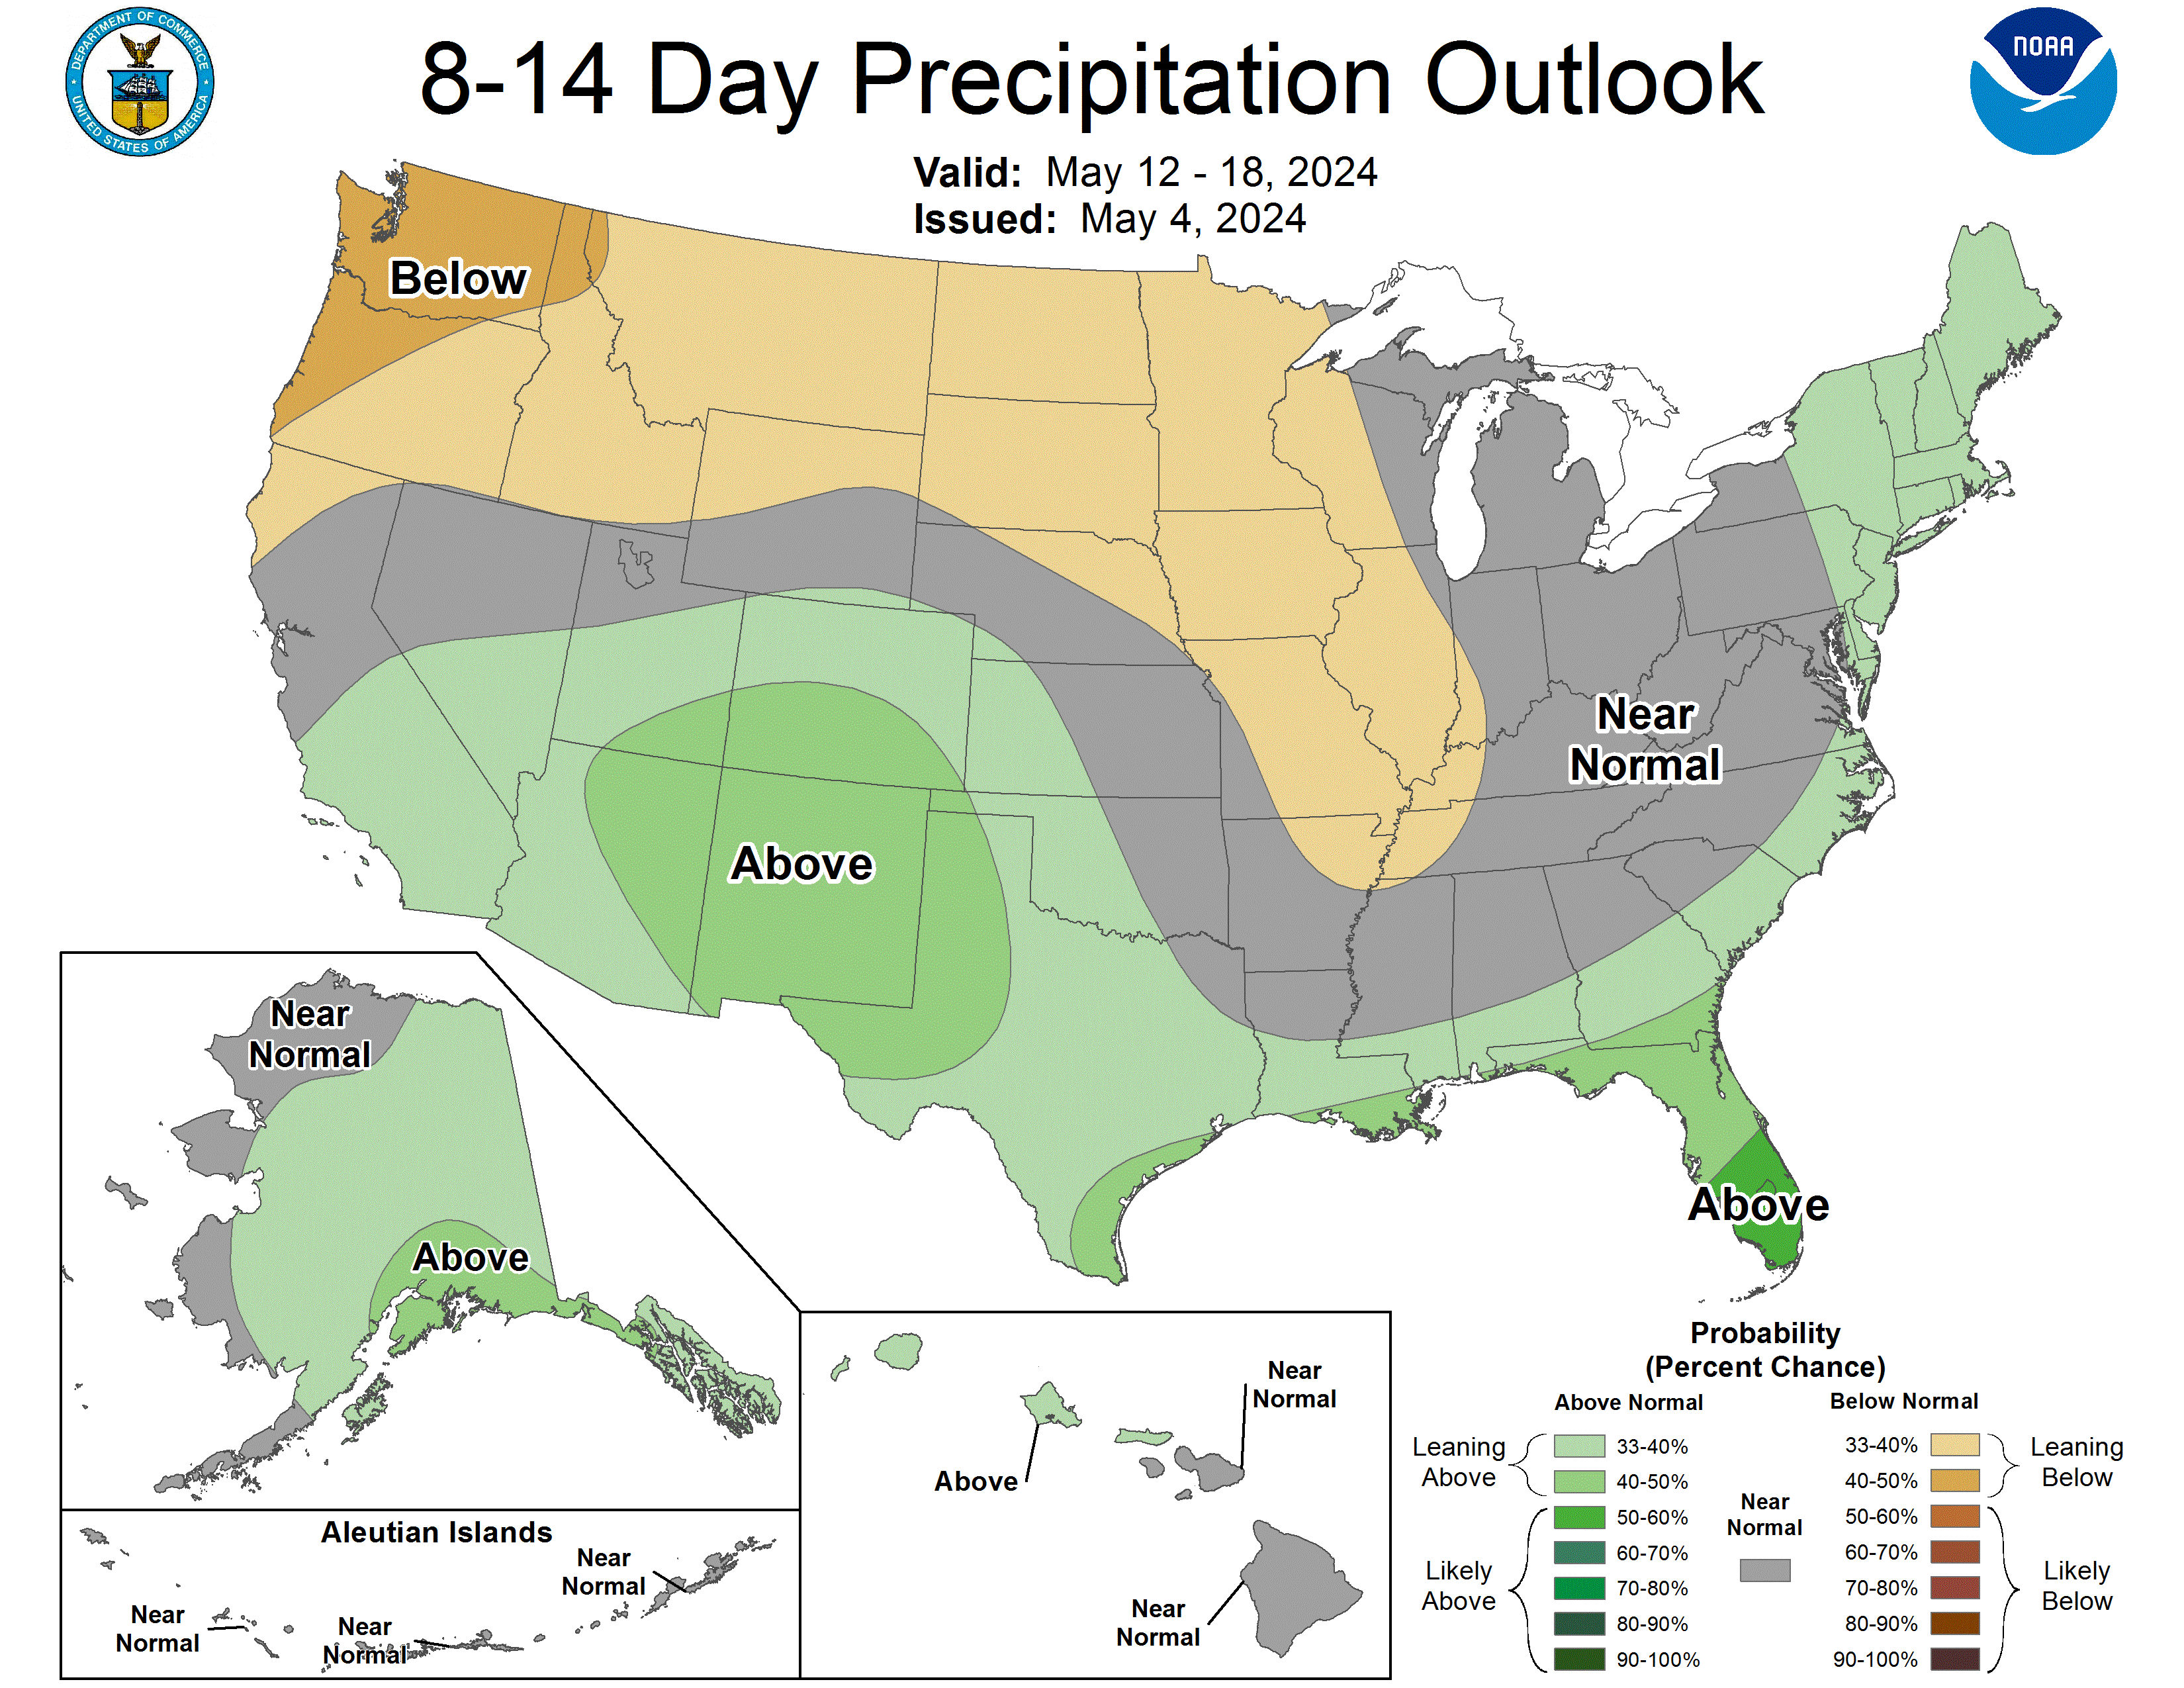 https://www.cpc.ncep.noaa.gov/products/predictions/814day/814prcp.new.gif